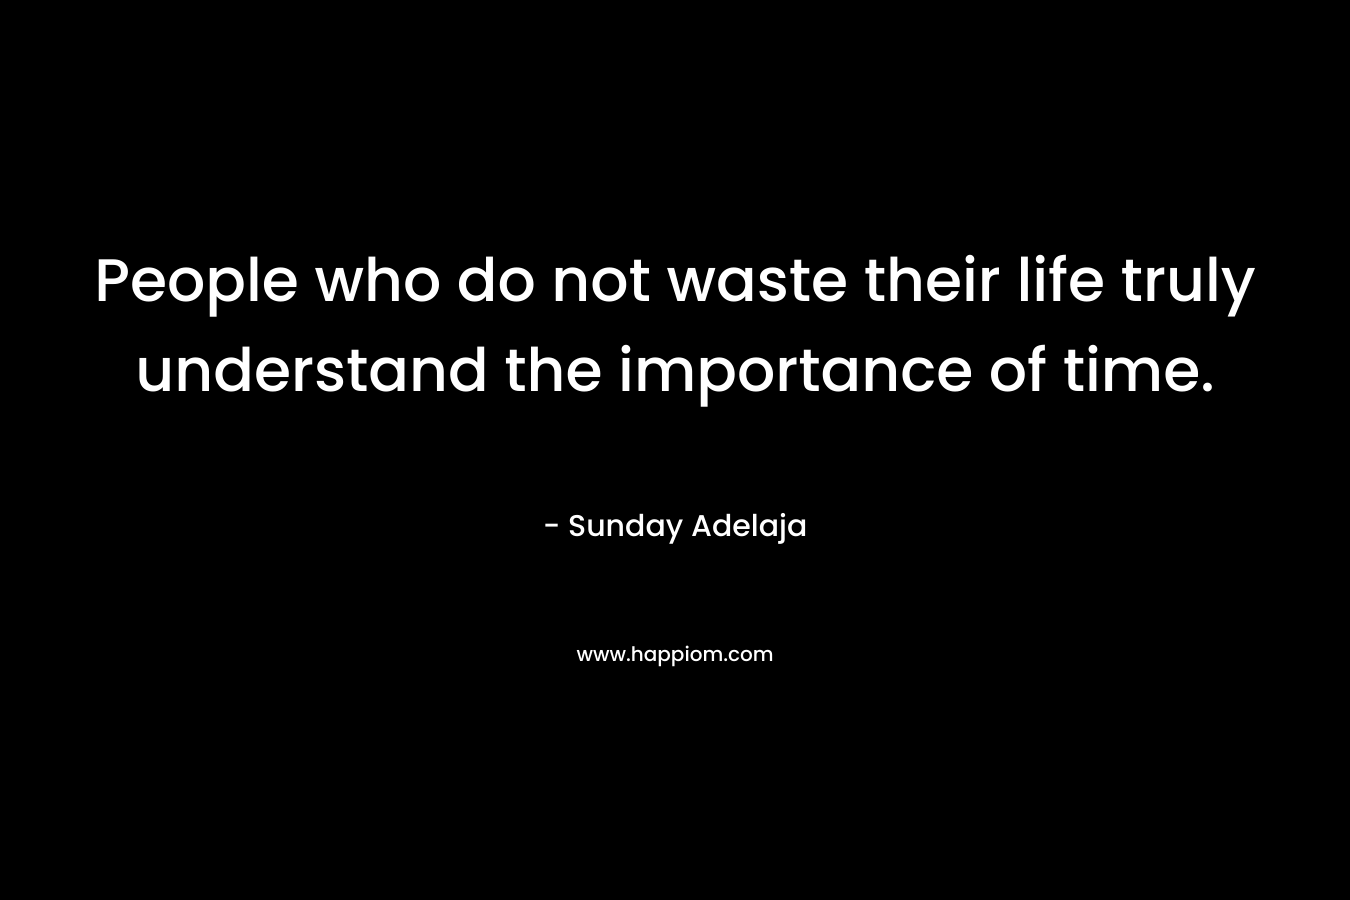 People who do not waste their life truly understand the importance of time.